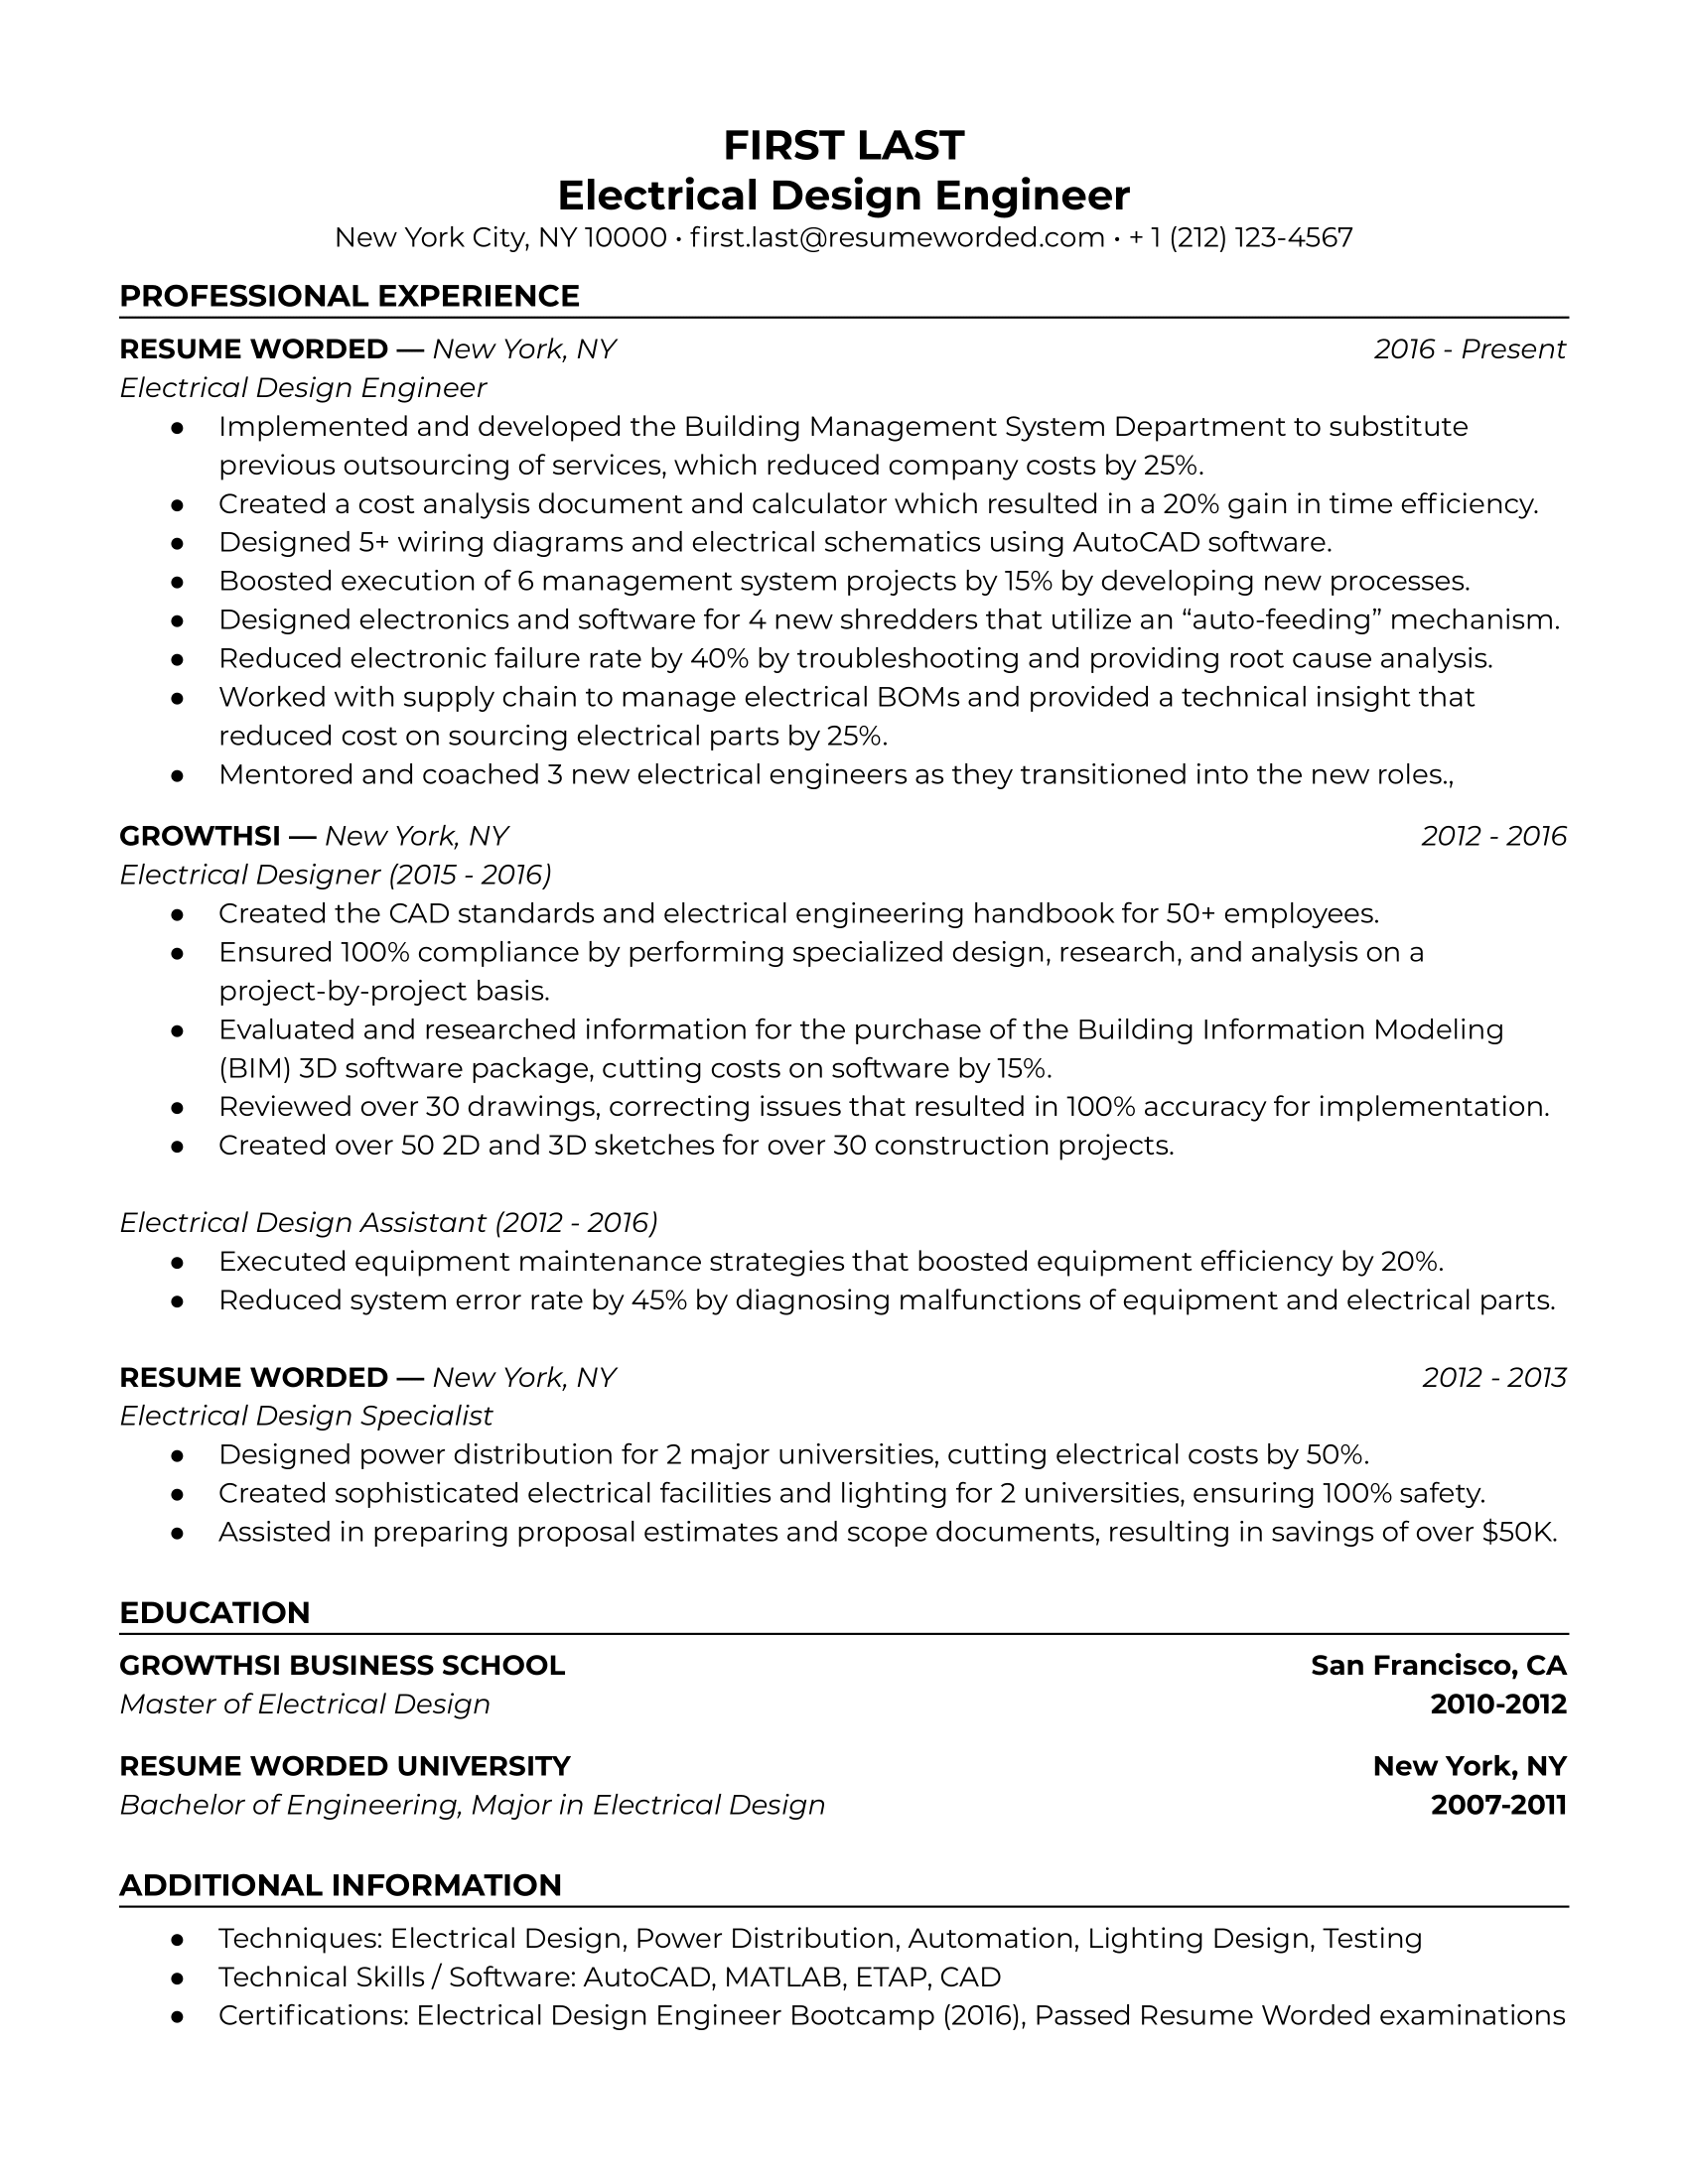 Electrical design engineer resume with hard skills section and relevant educational background